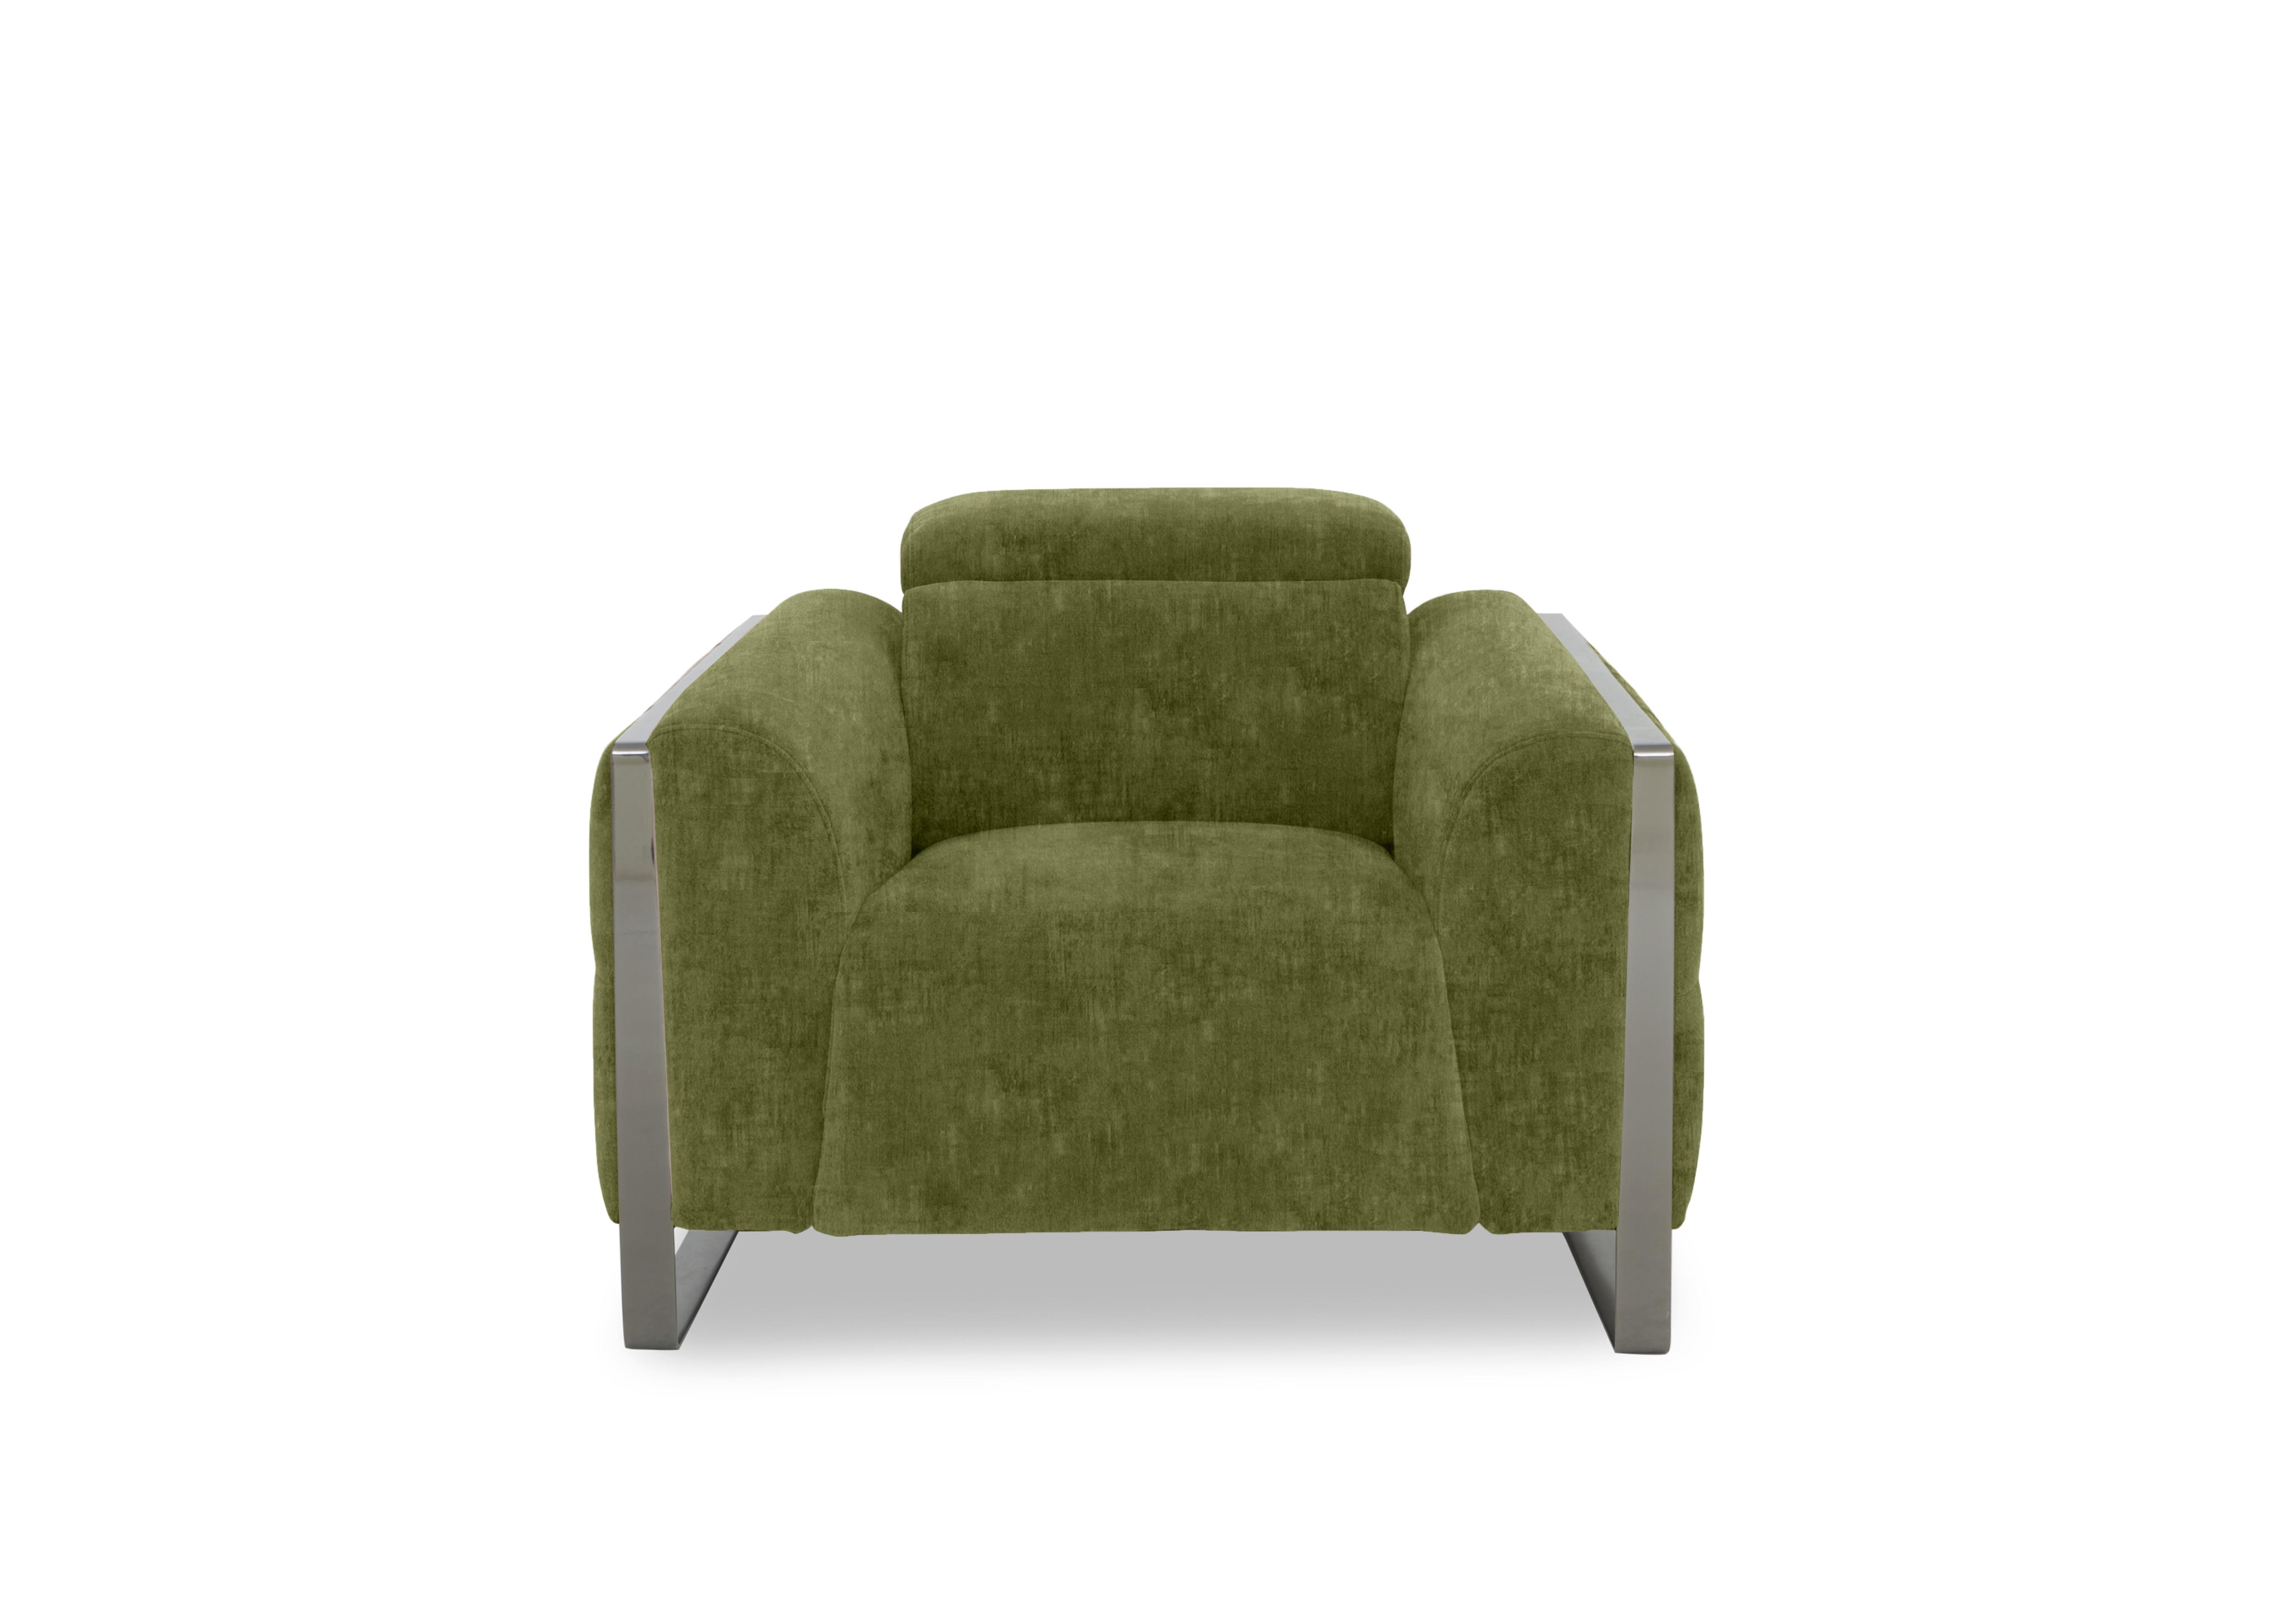 Gisella Fabric Chair in Heritage Olive 52003 on Furniture Village